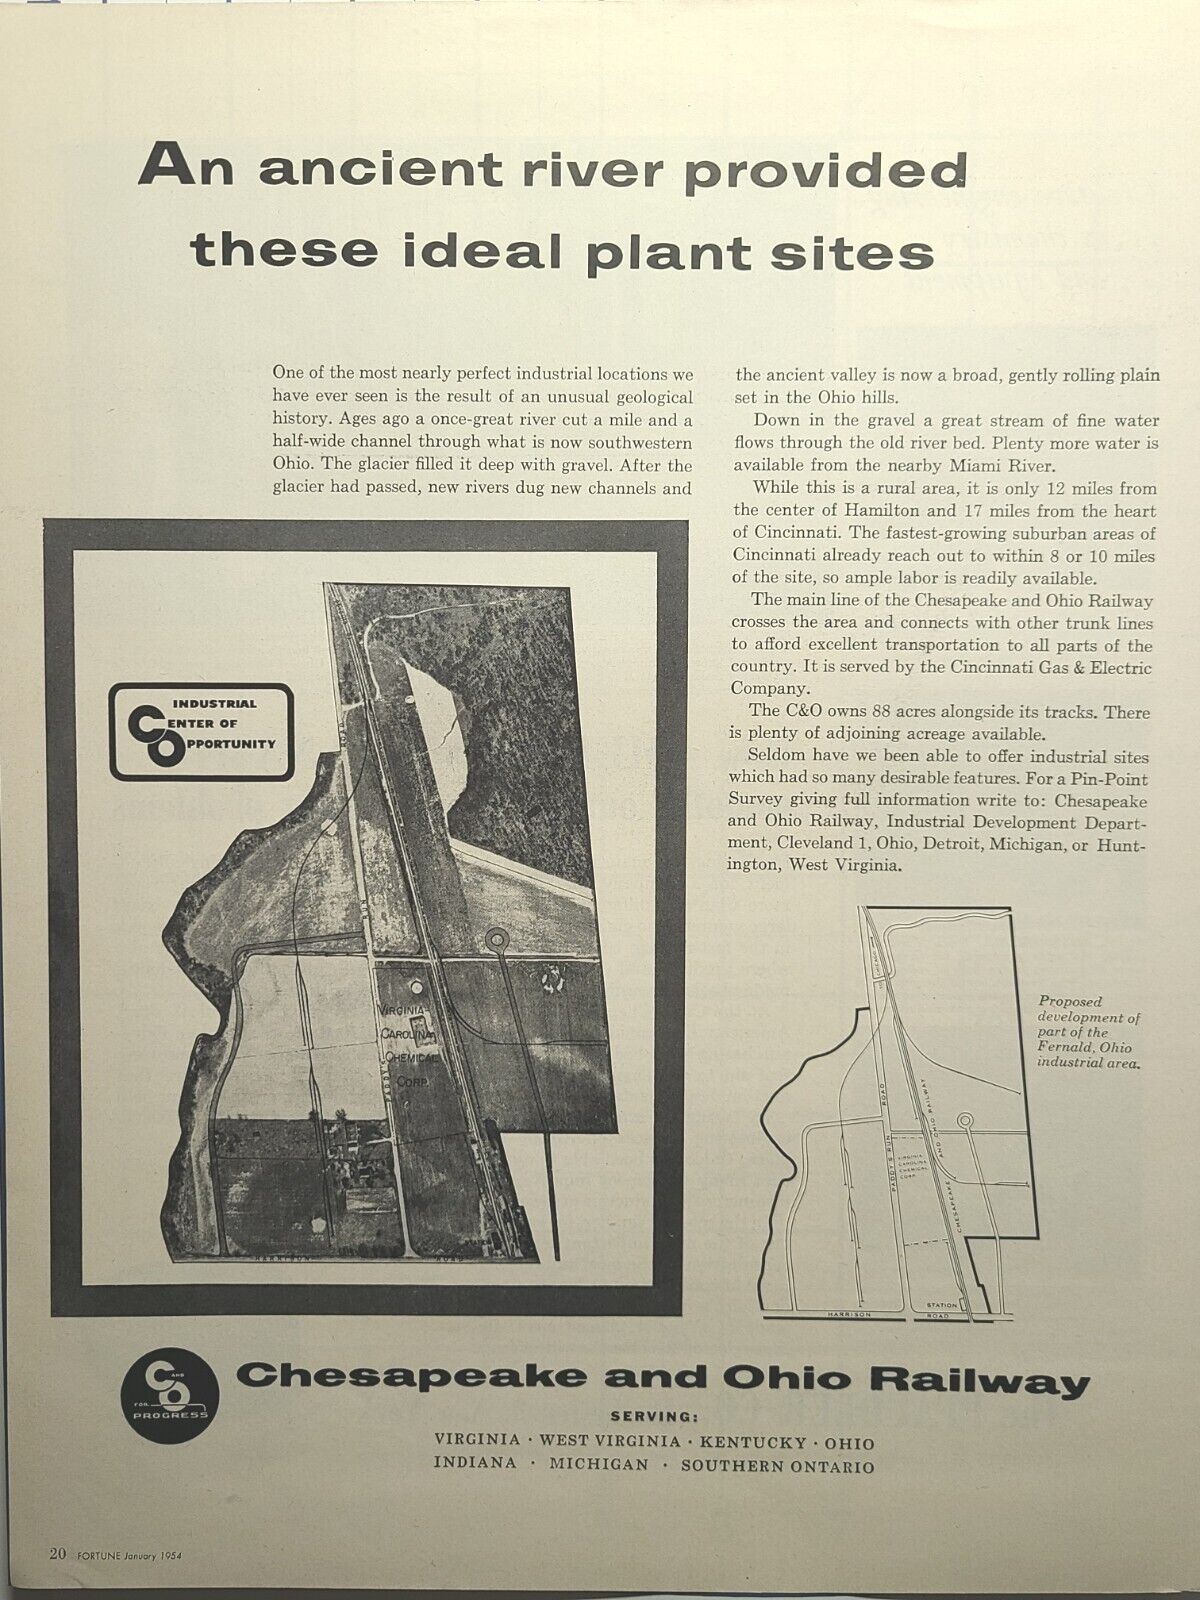 Chesapeake and Ohio Railway Industrial Center Opportunity Vintage Print Ad 1954